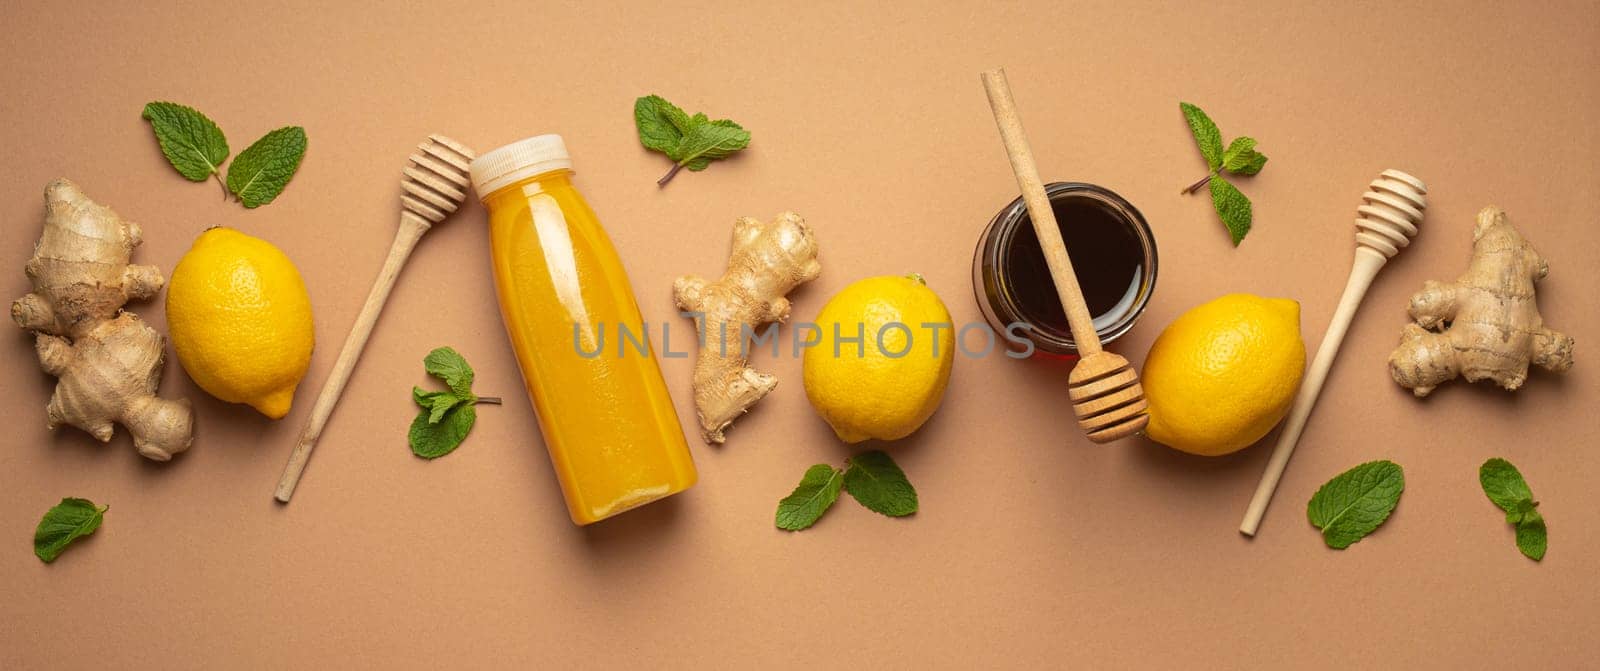 Composition with detox drink, lemons, mint, ginger, honey in glass jar and honey wooden dippers top view. Food for immunity stimulation and against flu. Healthy natural remedies to boost immune system by its_al_dente